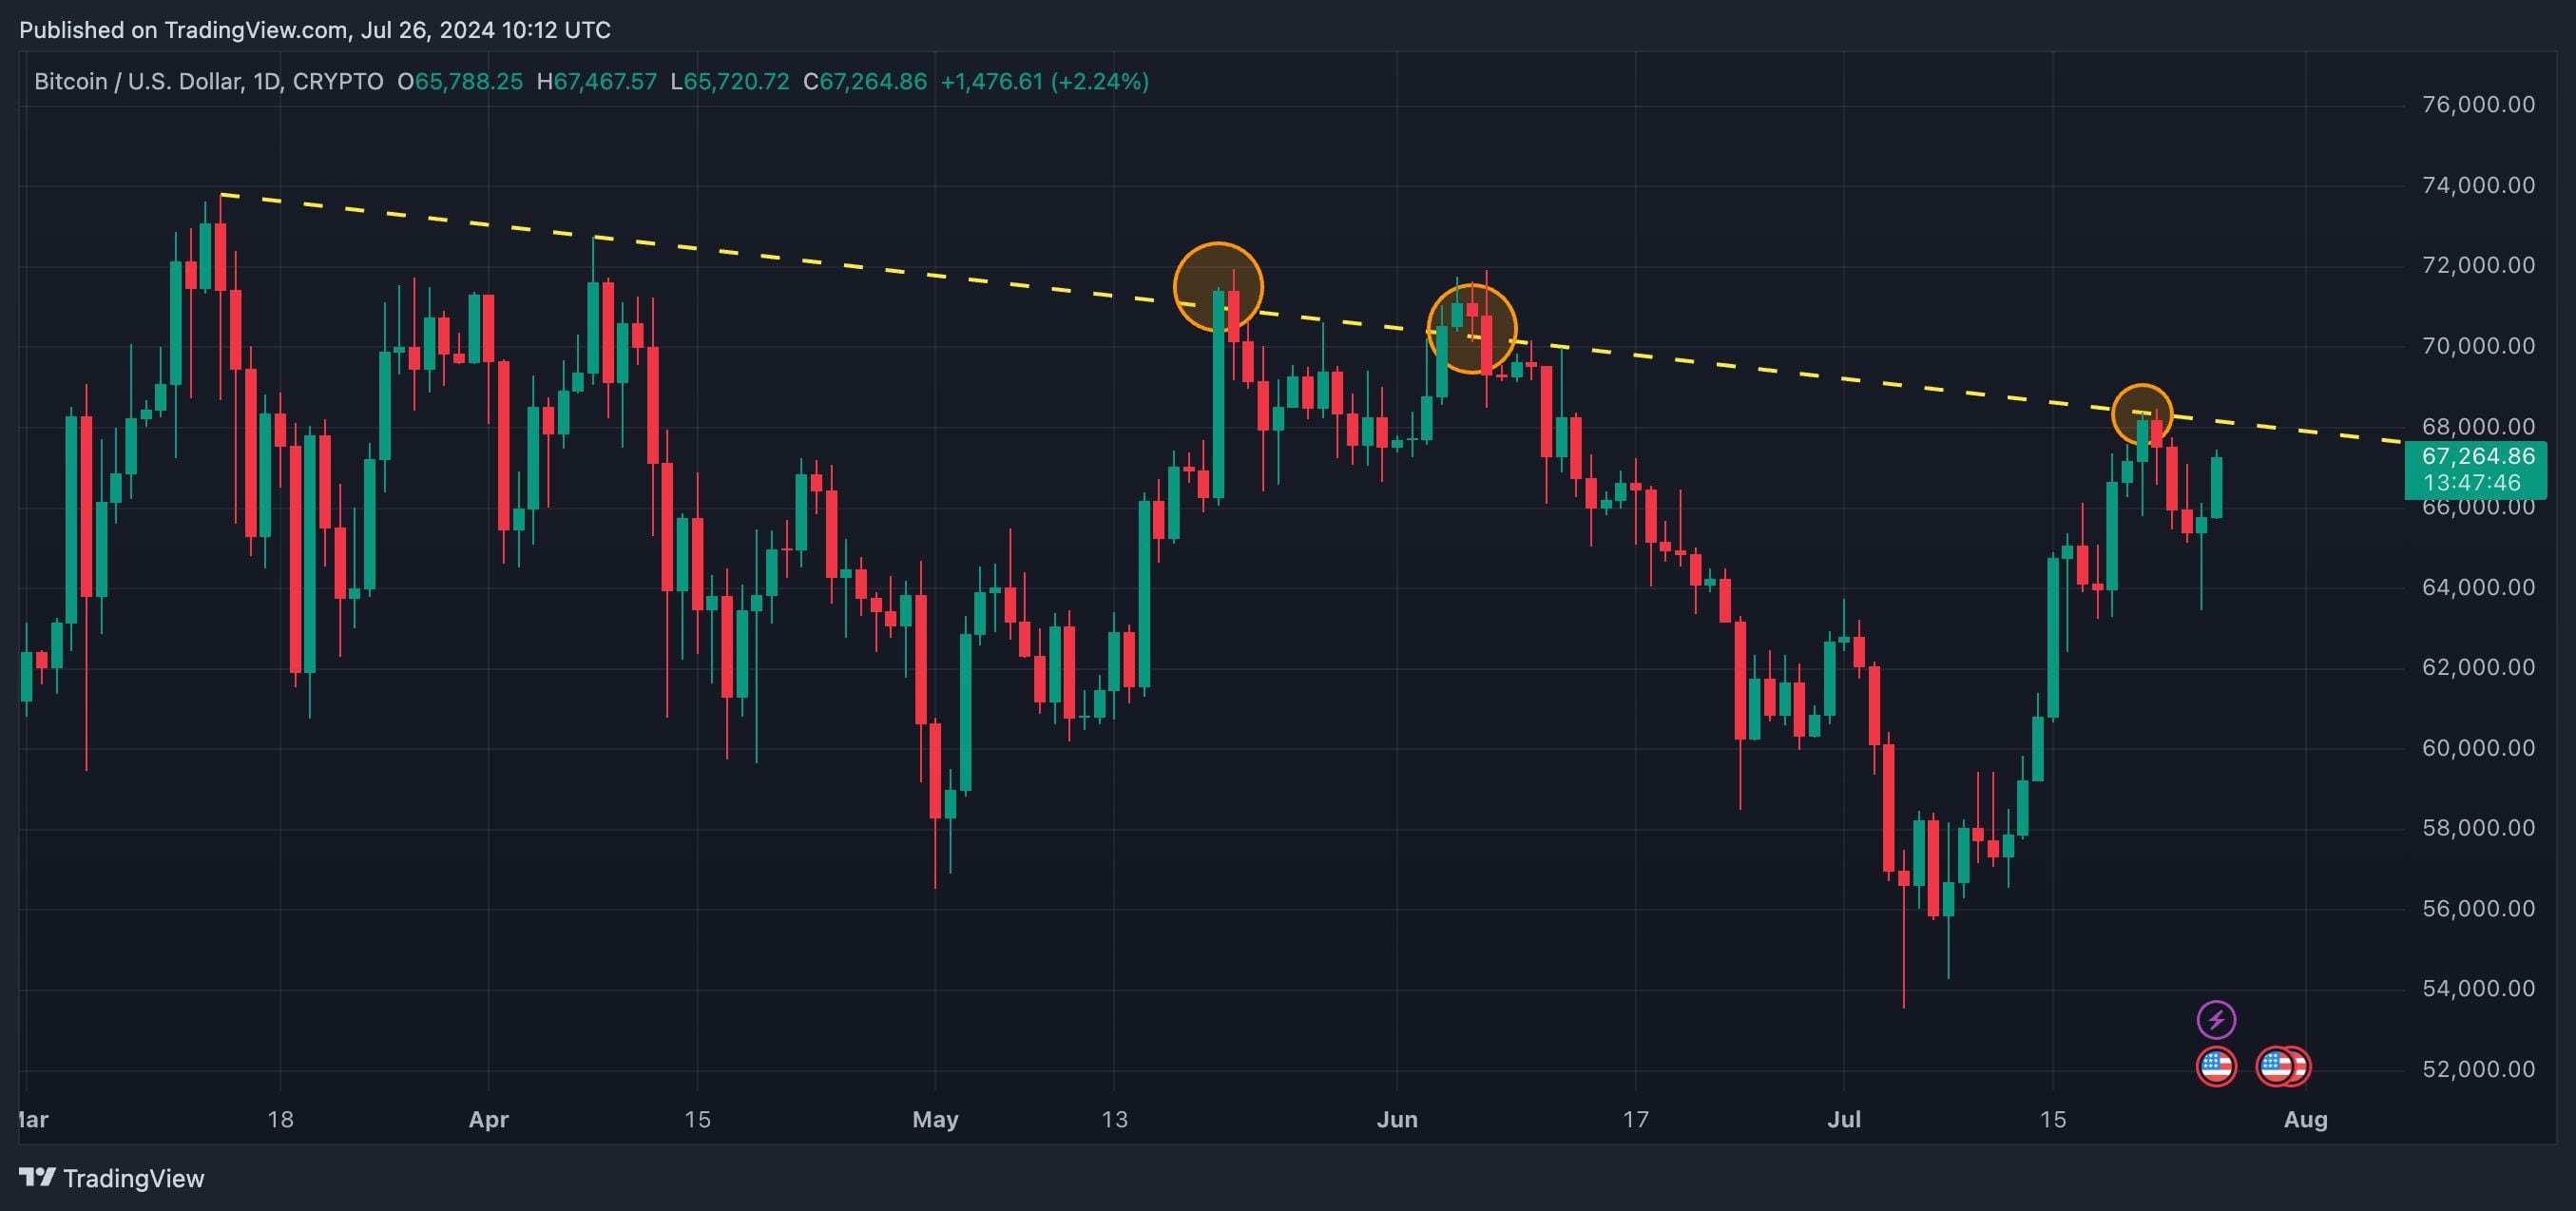 BTC's price nears the trendline resistance that capped upside on Monday. (TradingView/CoinDesk)